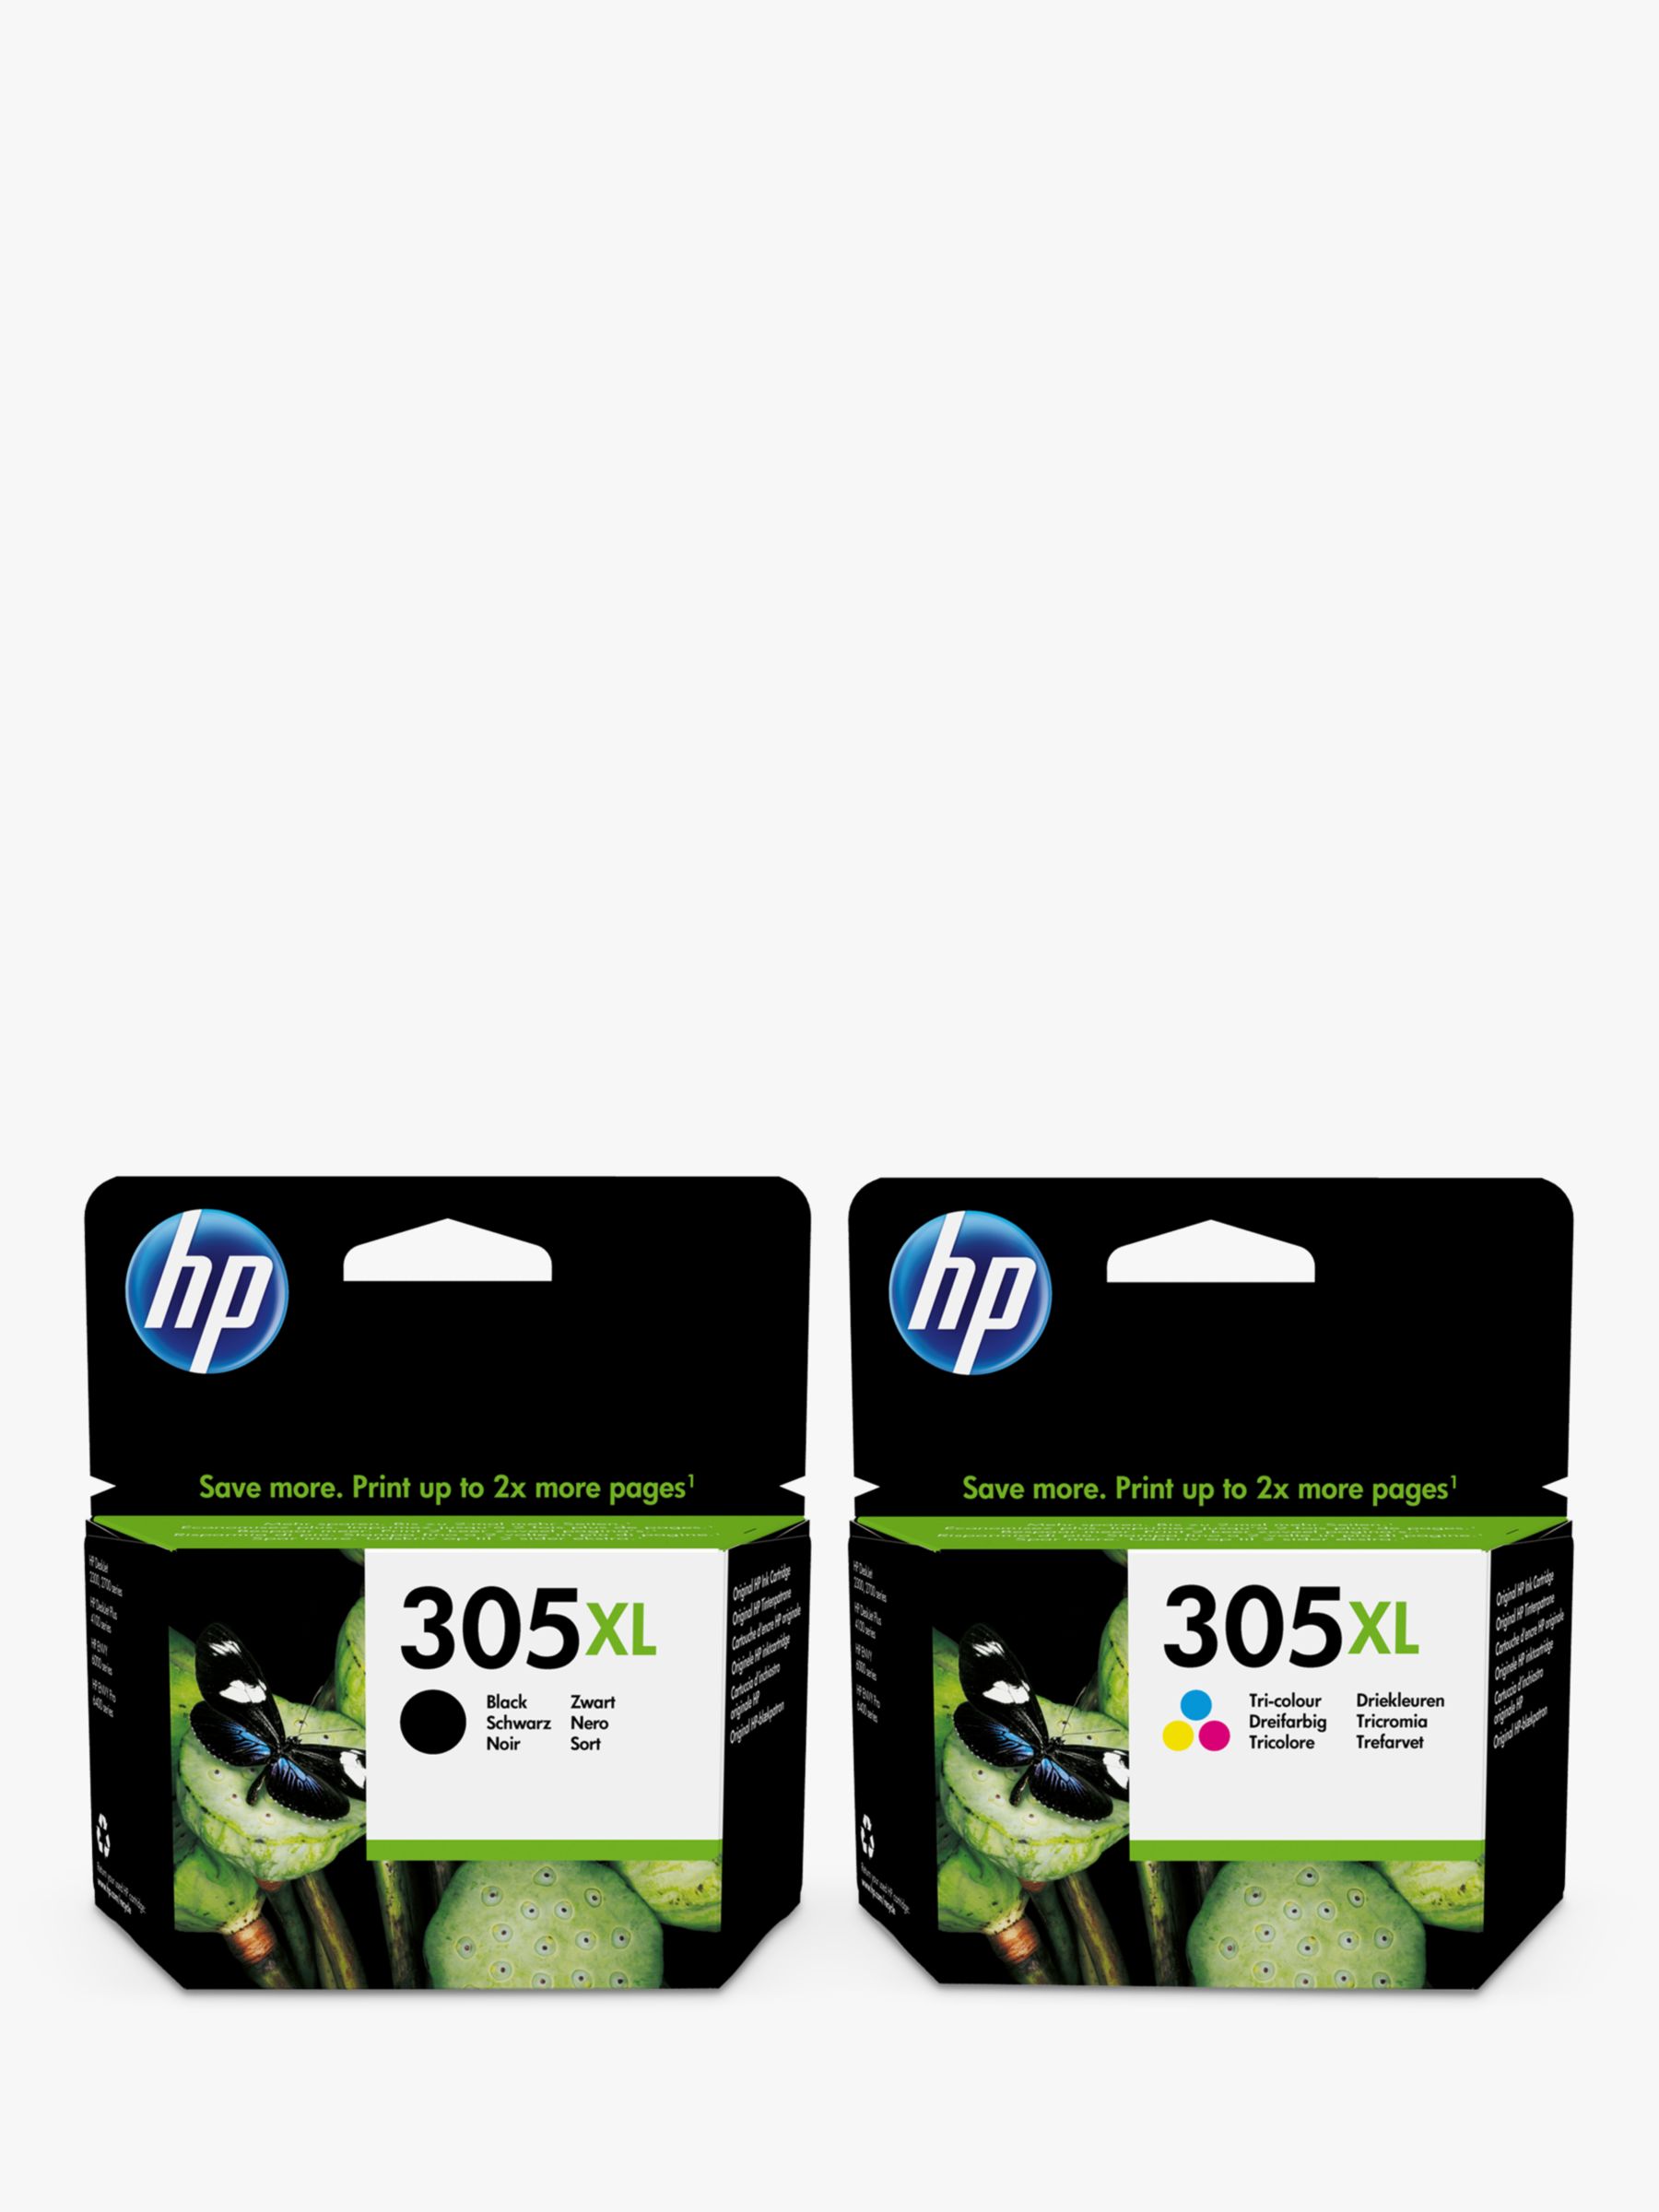 Hp 305xl Ink Cartridge Black And Tri Colour Multipack Pack Of 2